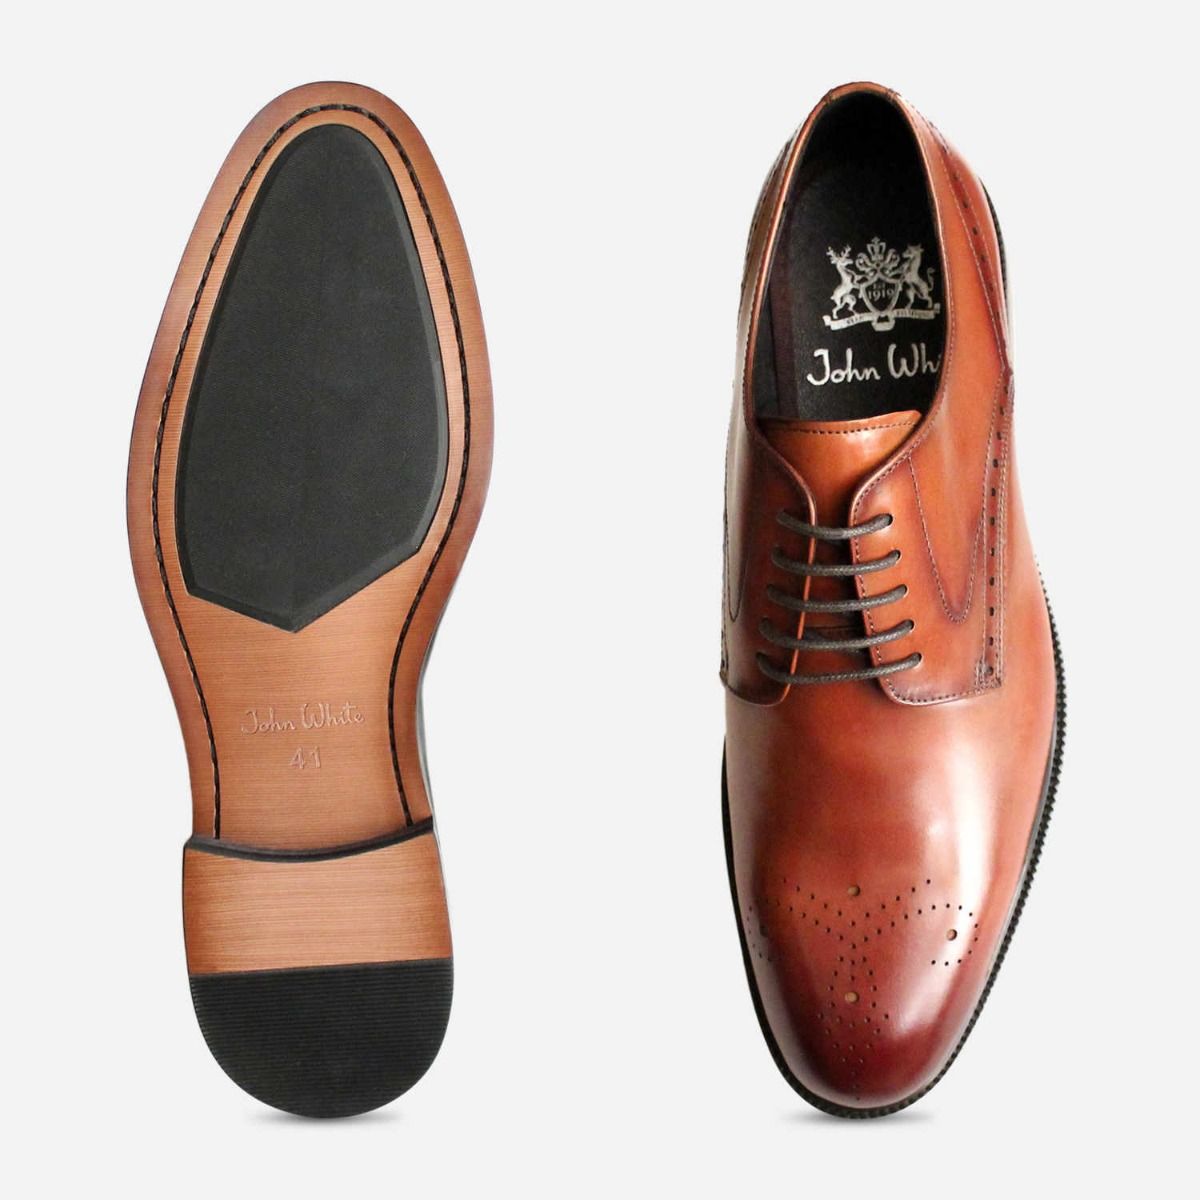 John White Formal Derby Brogue Shoes in Tan Leather